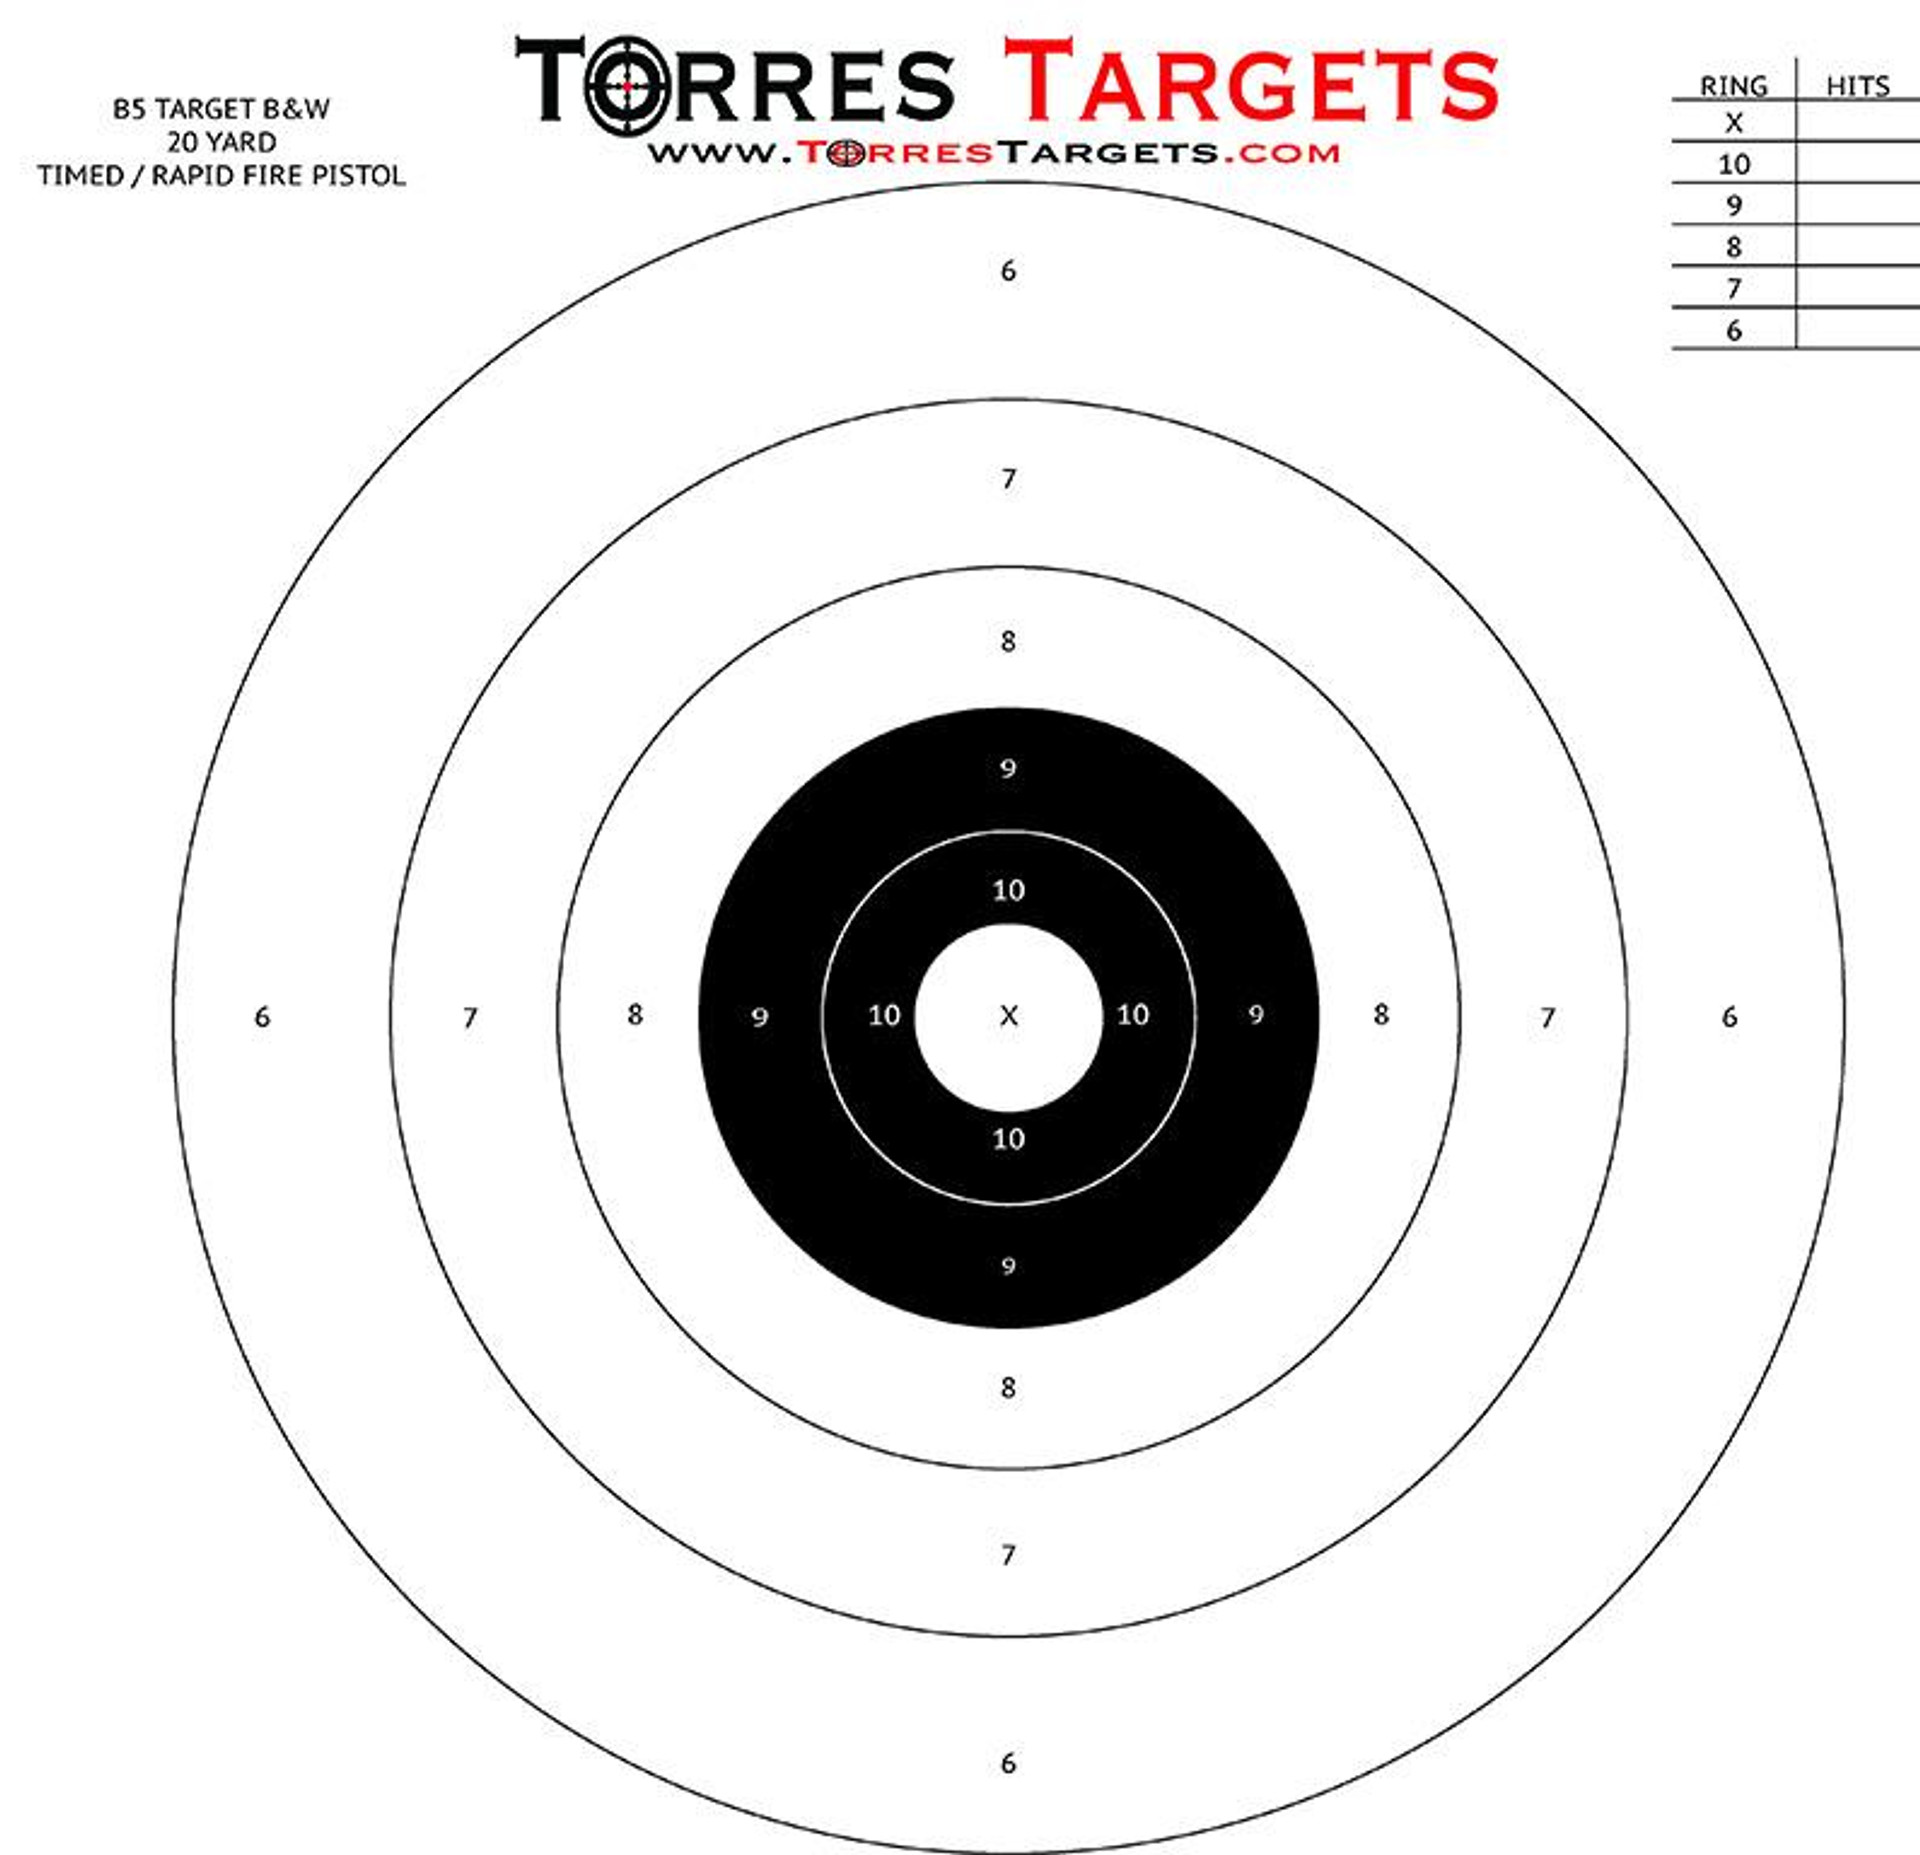 b5-style-bullseye-target-black-and-white-by-torres-targets